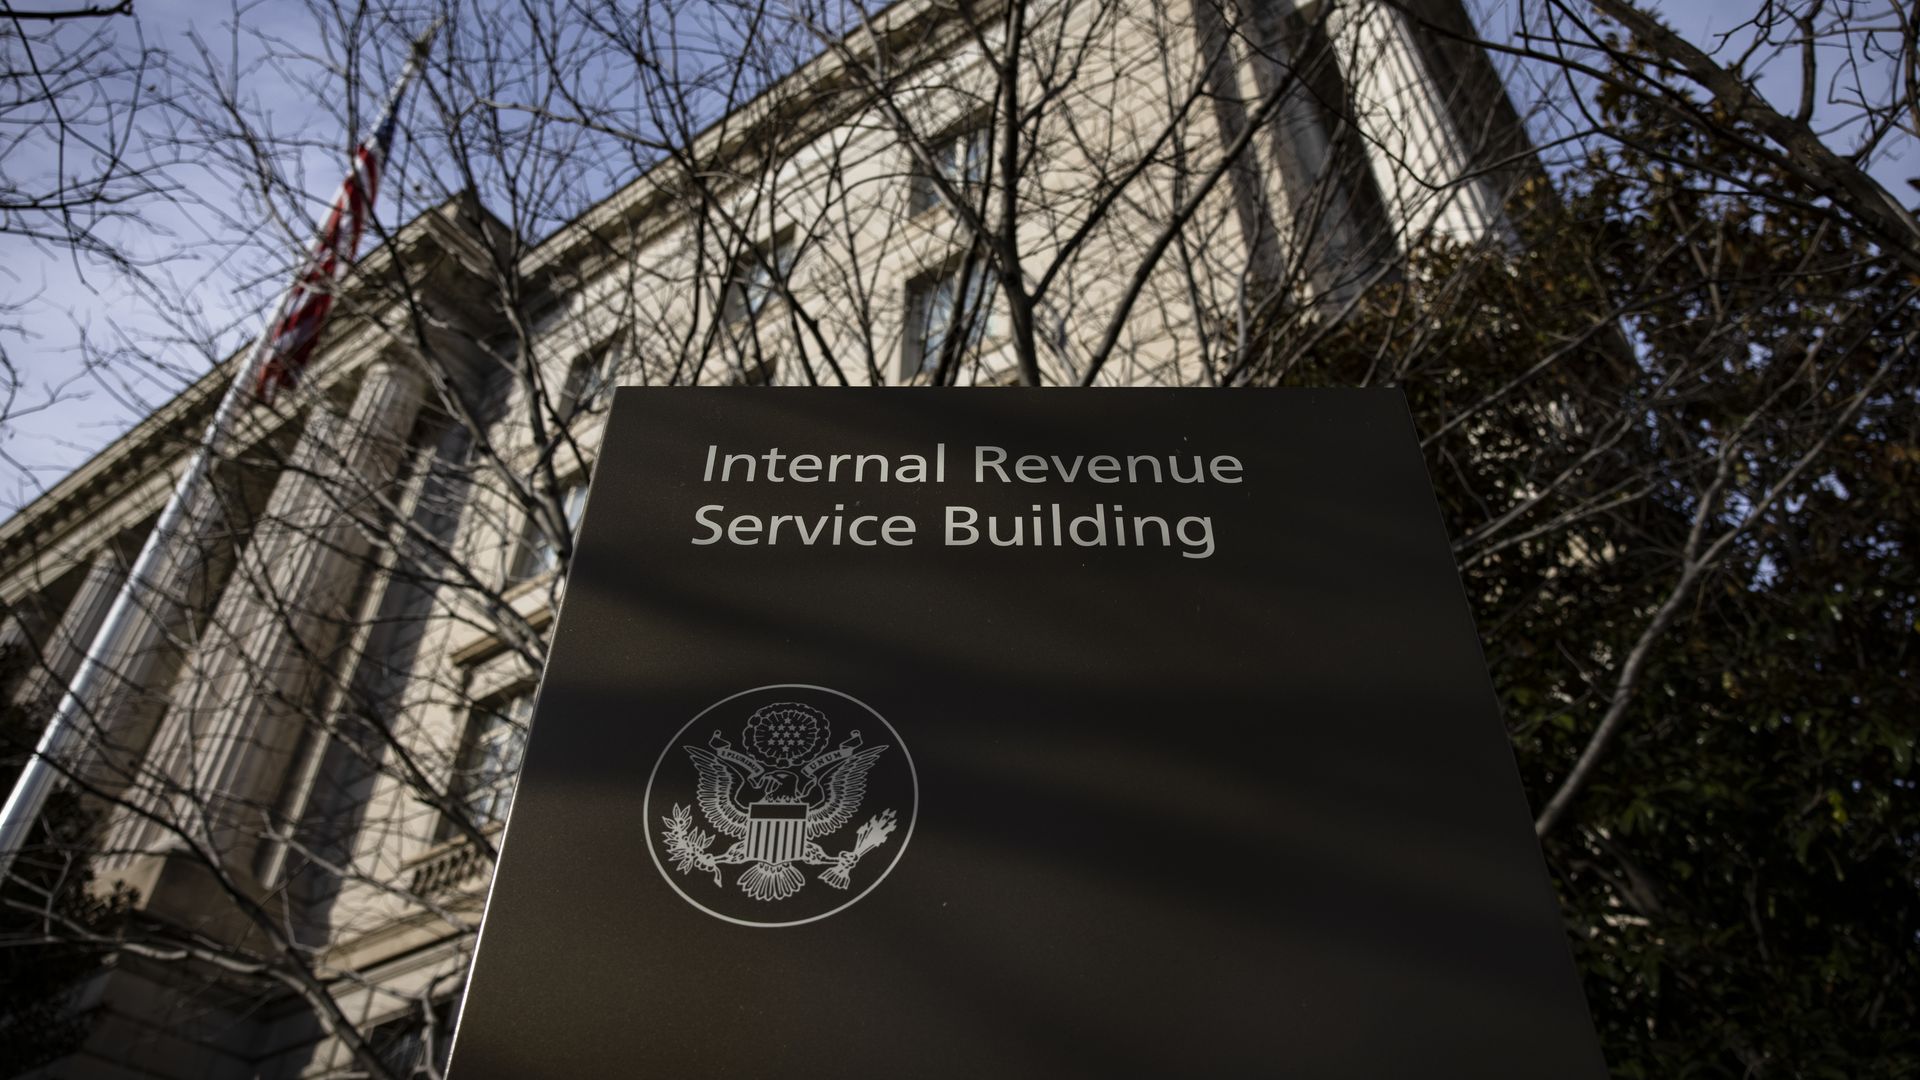 Picture of The Internal Revenue Service (IRS) headquarters in Washington, D.C.